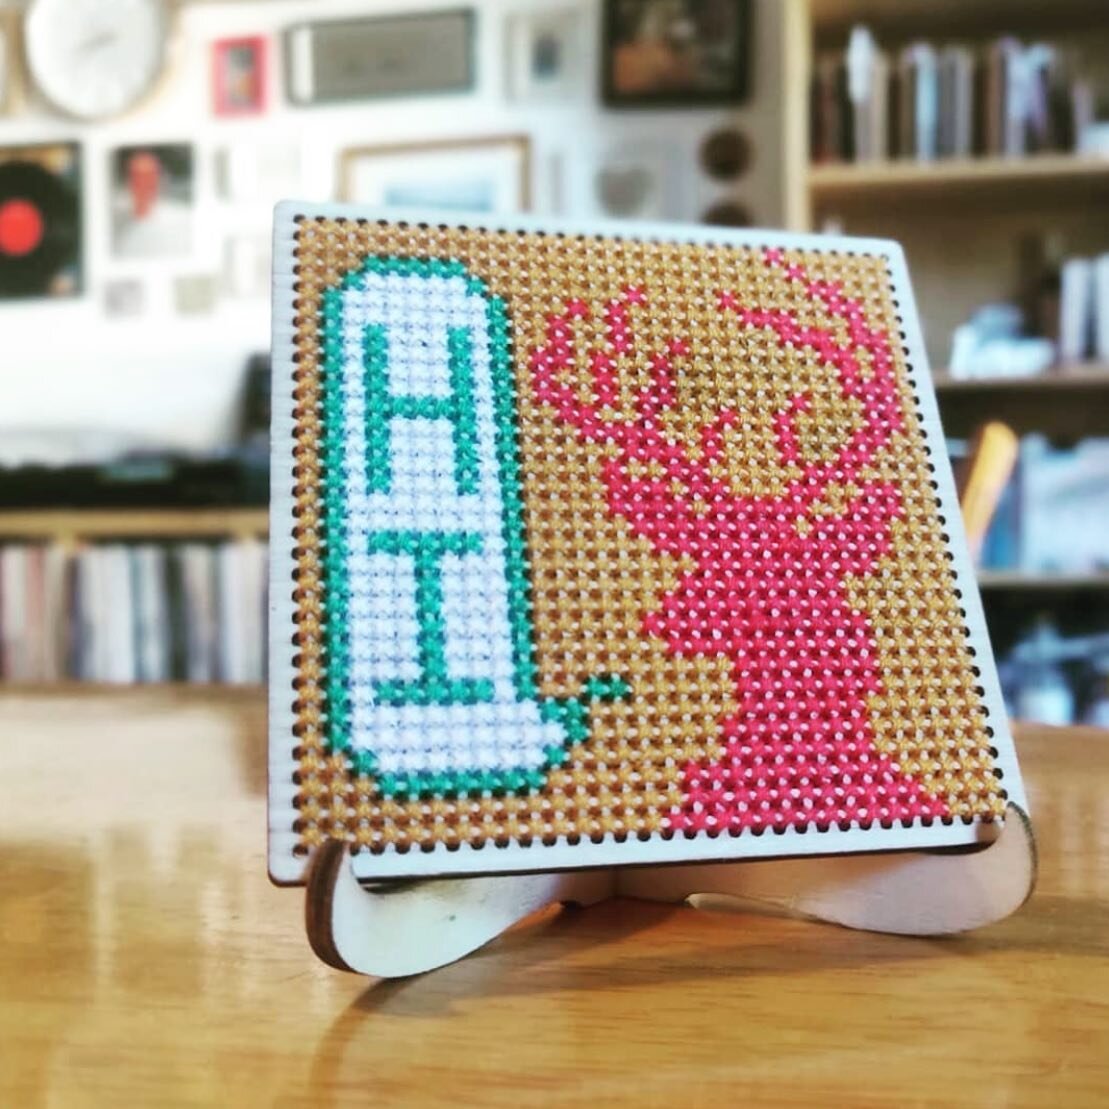 😍 Thanks for sharing your finished cross stitch @craft.eveything !
Share your planner or project with us for a repost!
.
#repost #tagus #tagged #loveit #wow #inspiration #crossstitch #crossstitchersofinstagram #crossstitching #fiberart #floss #dmc #